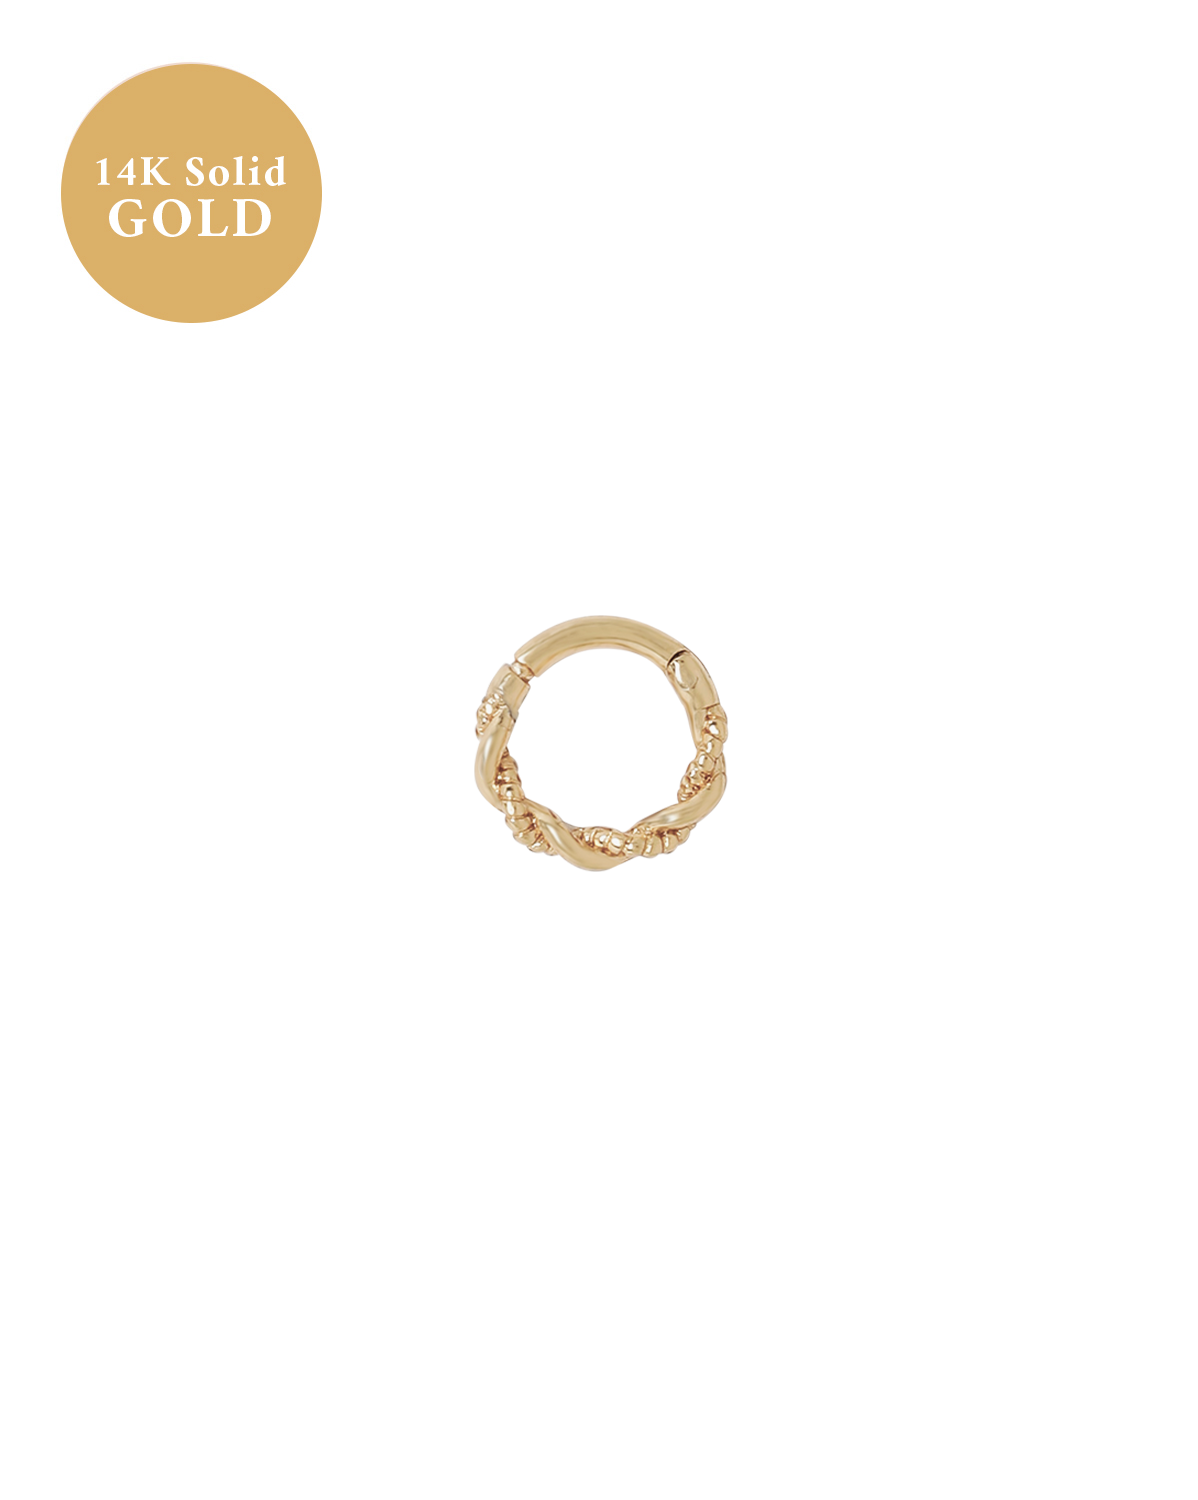 14K Solid Gold Merida Small Curled Hoop